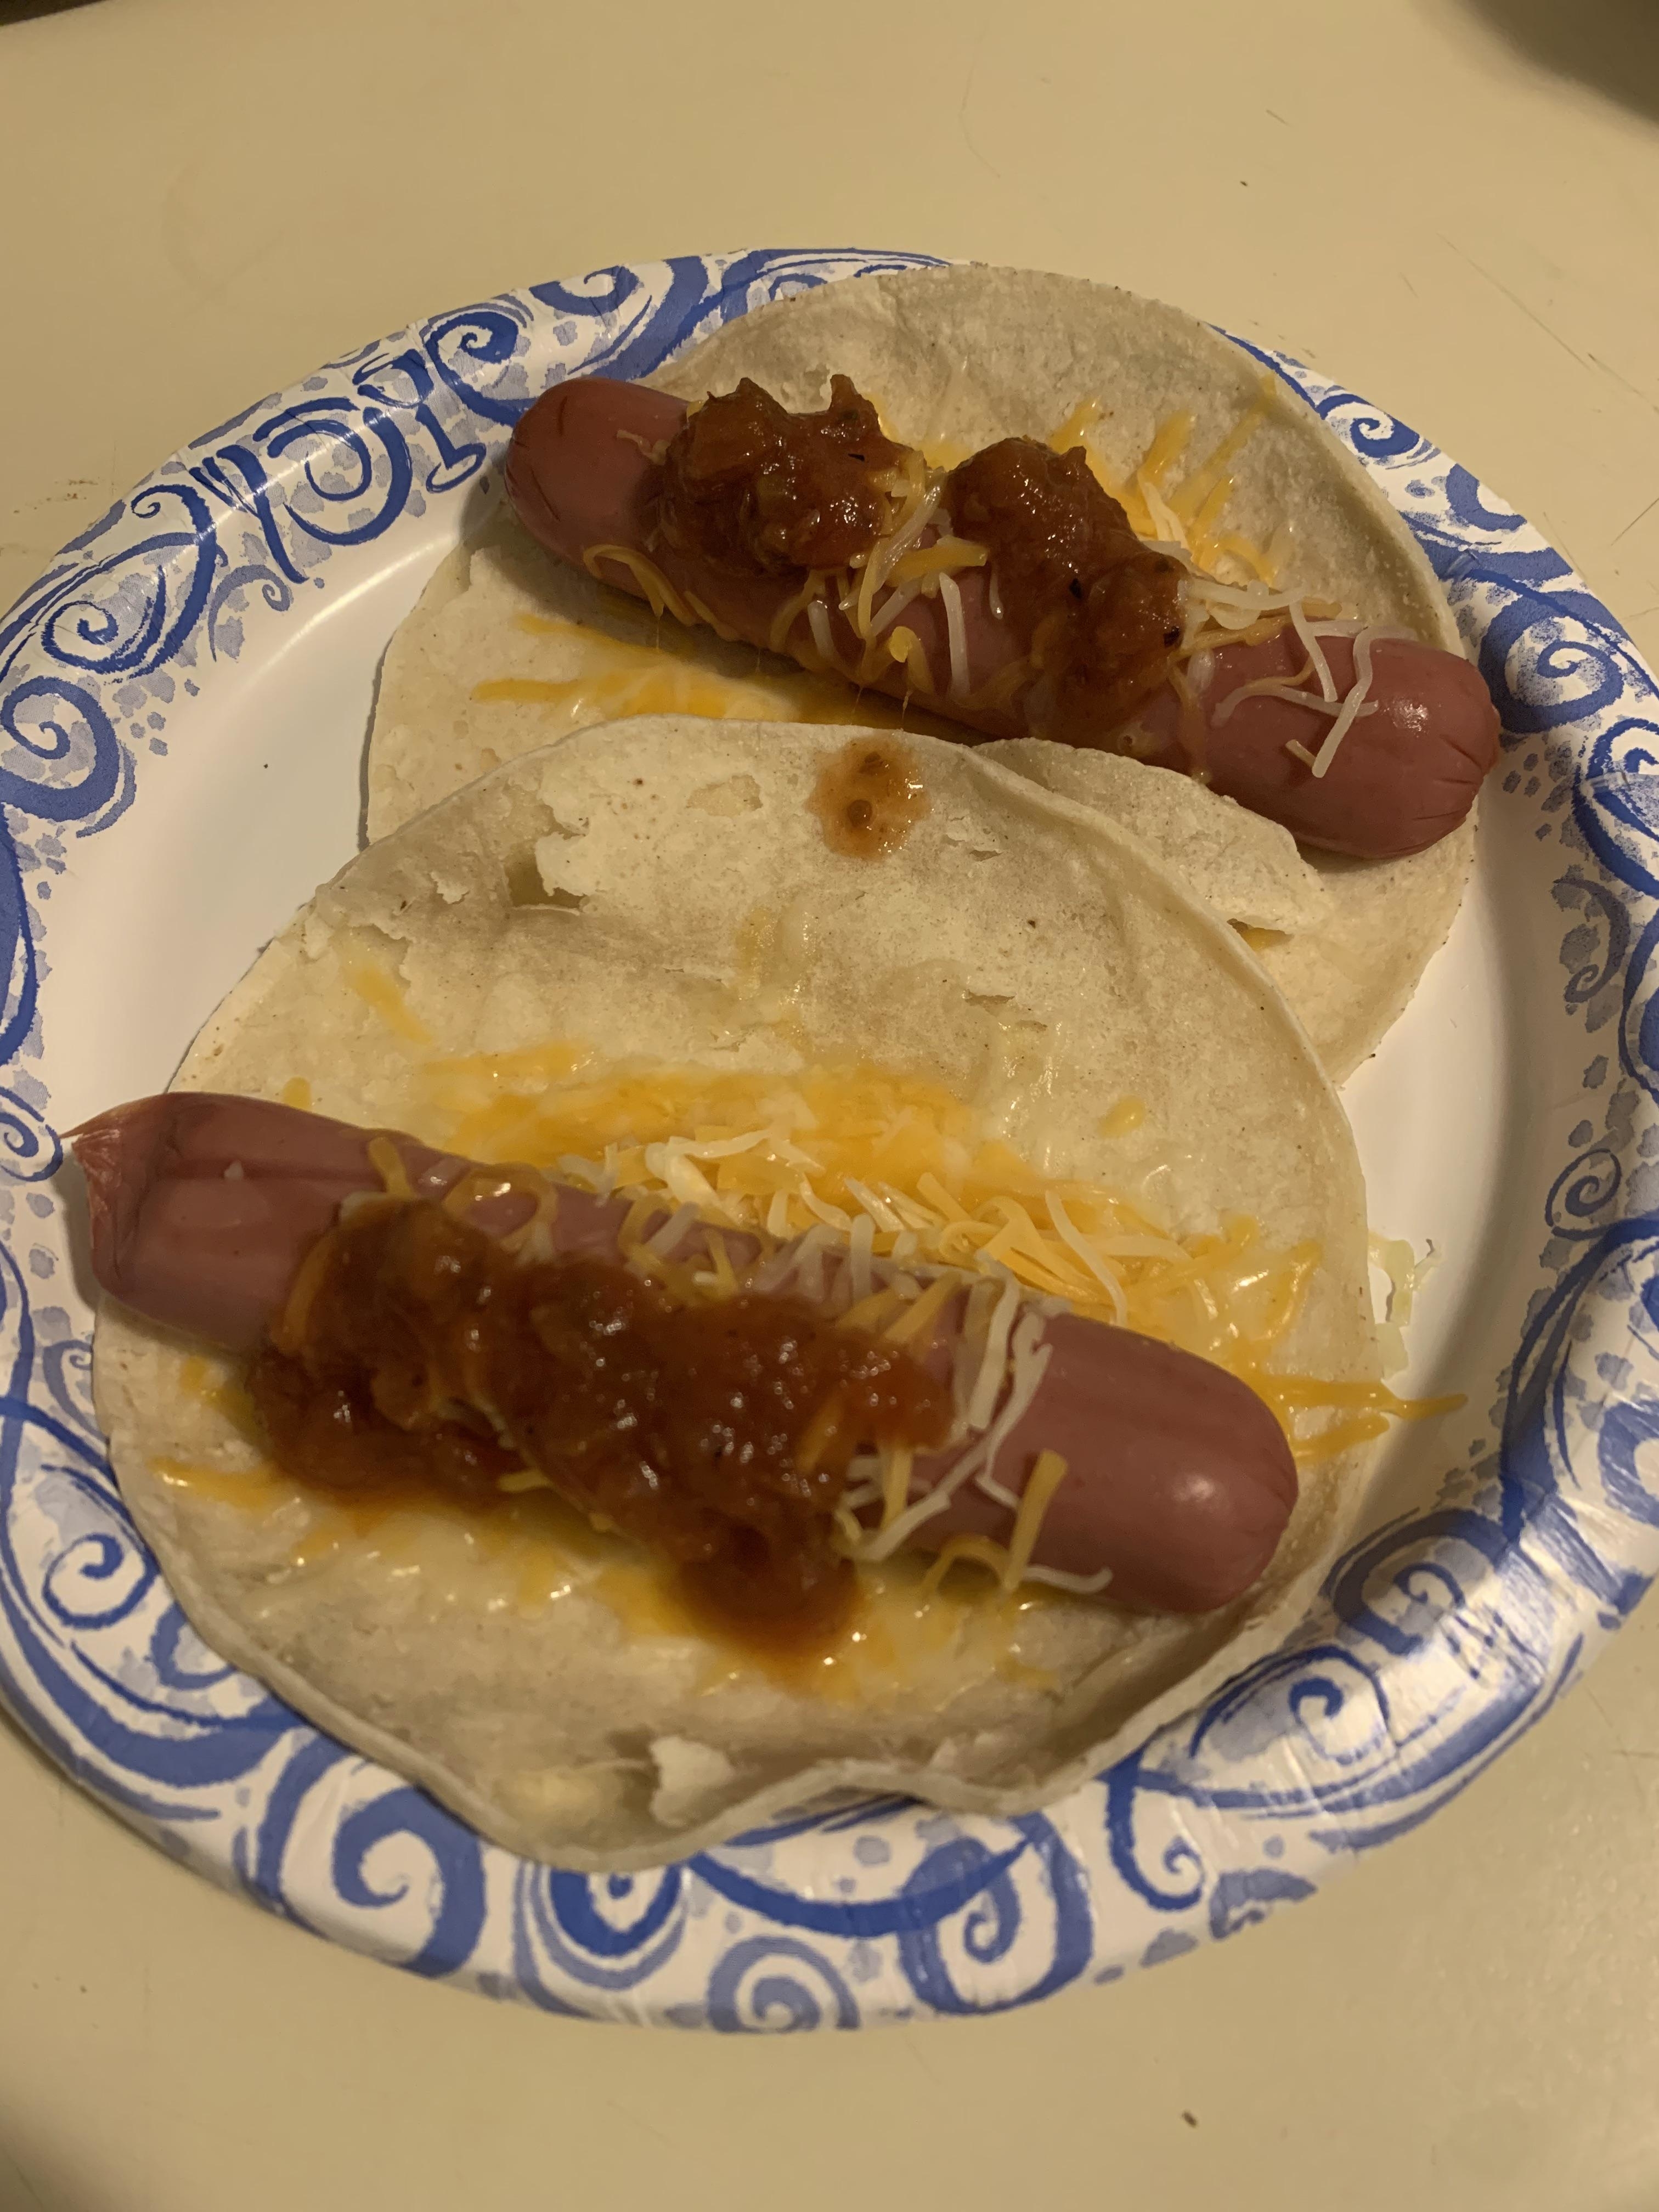 Two hot dogs with cheese and salsa on open tortillas on a plate